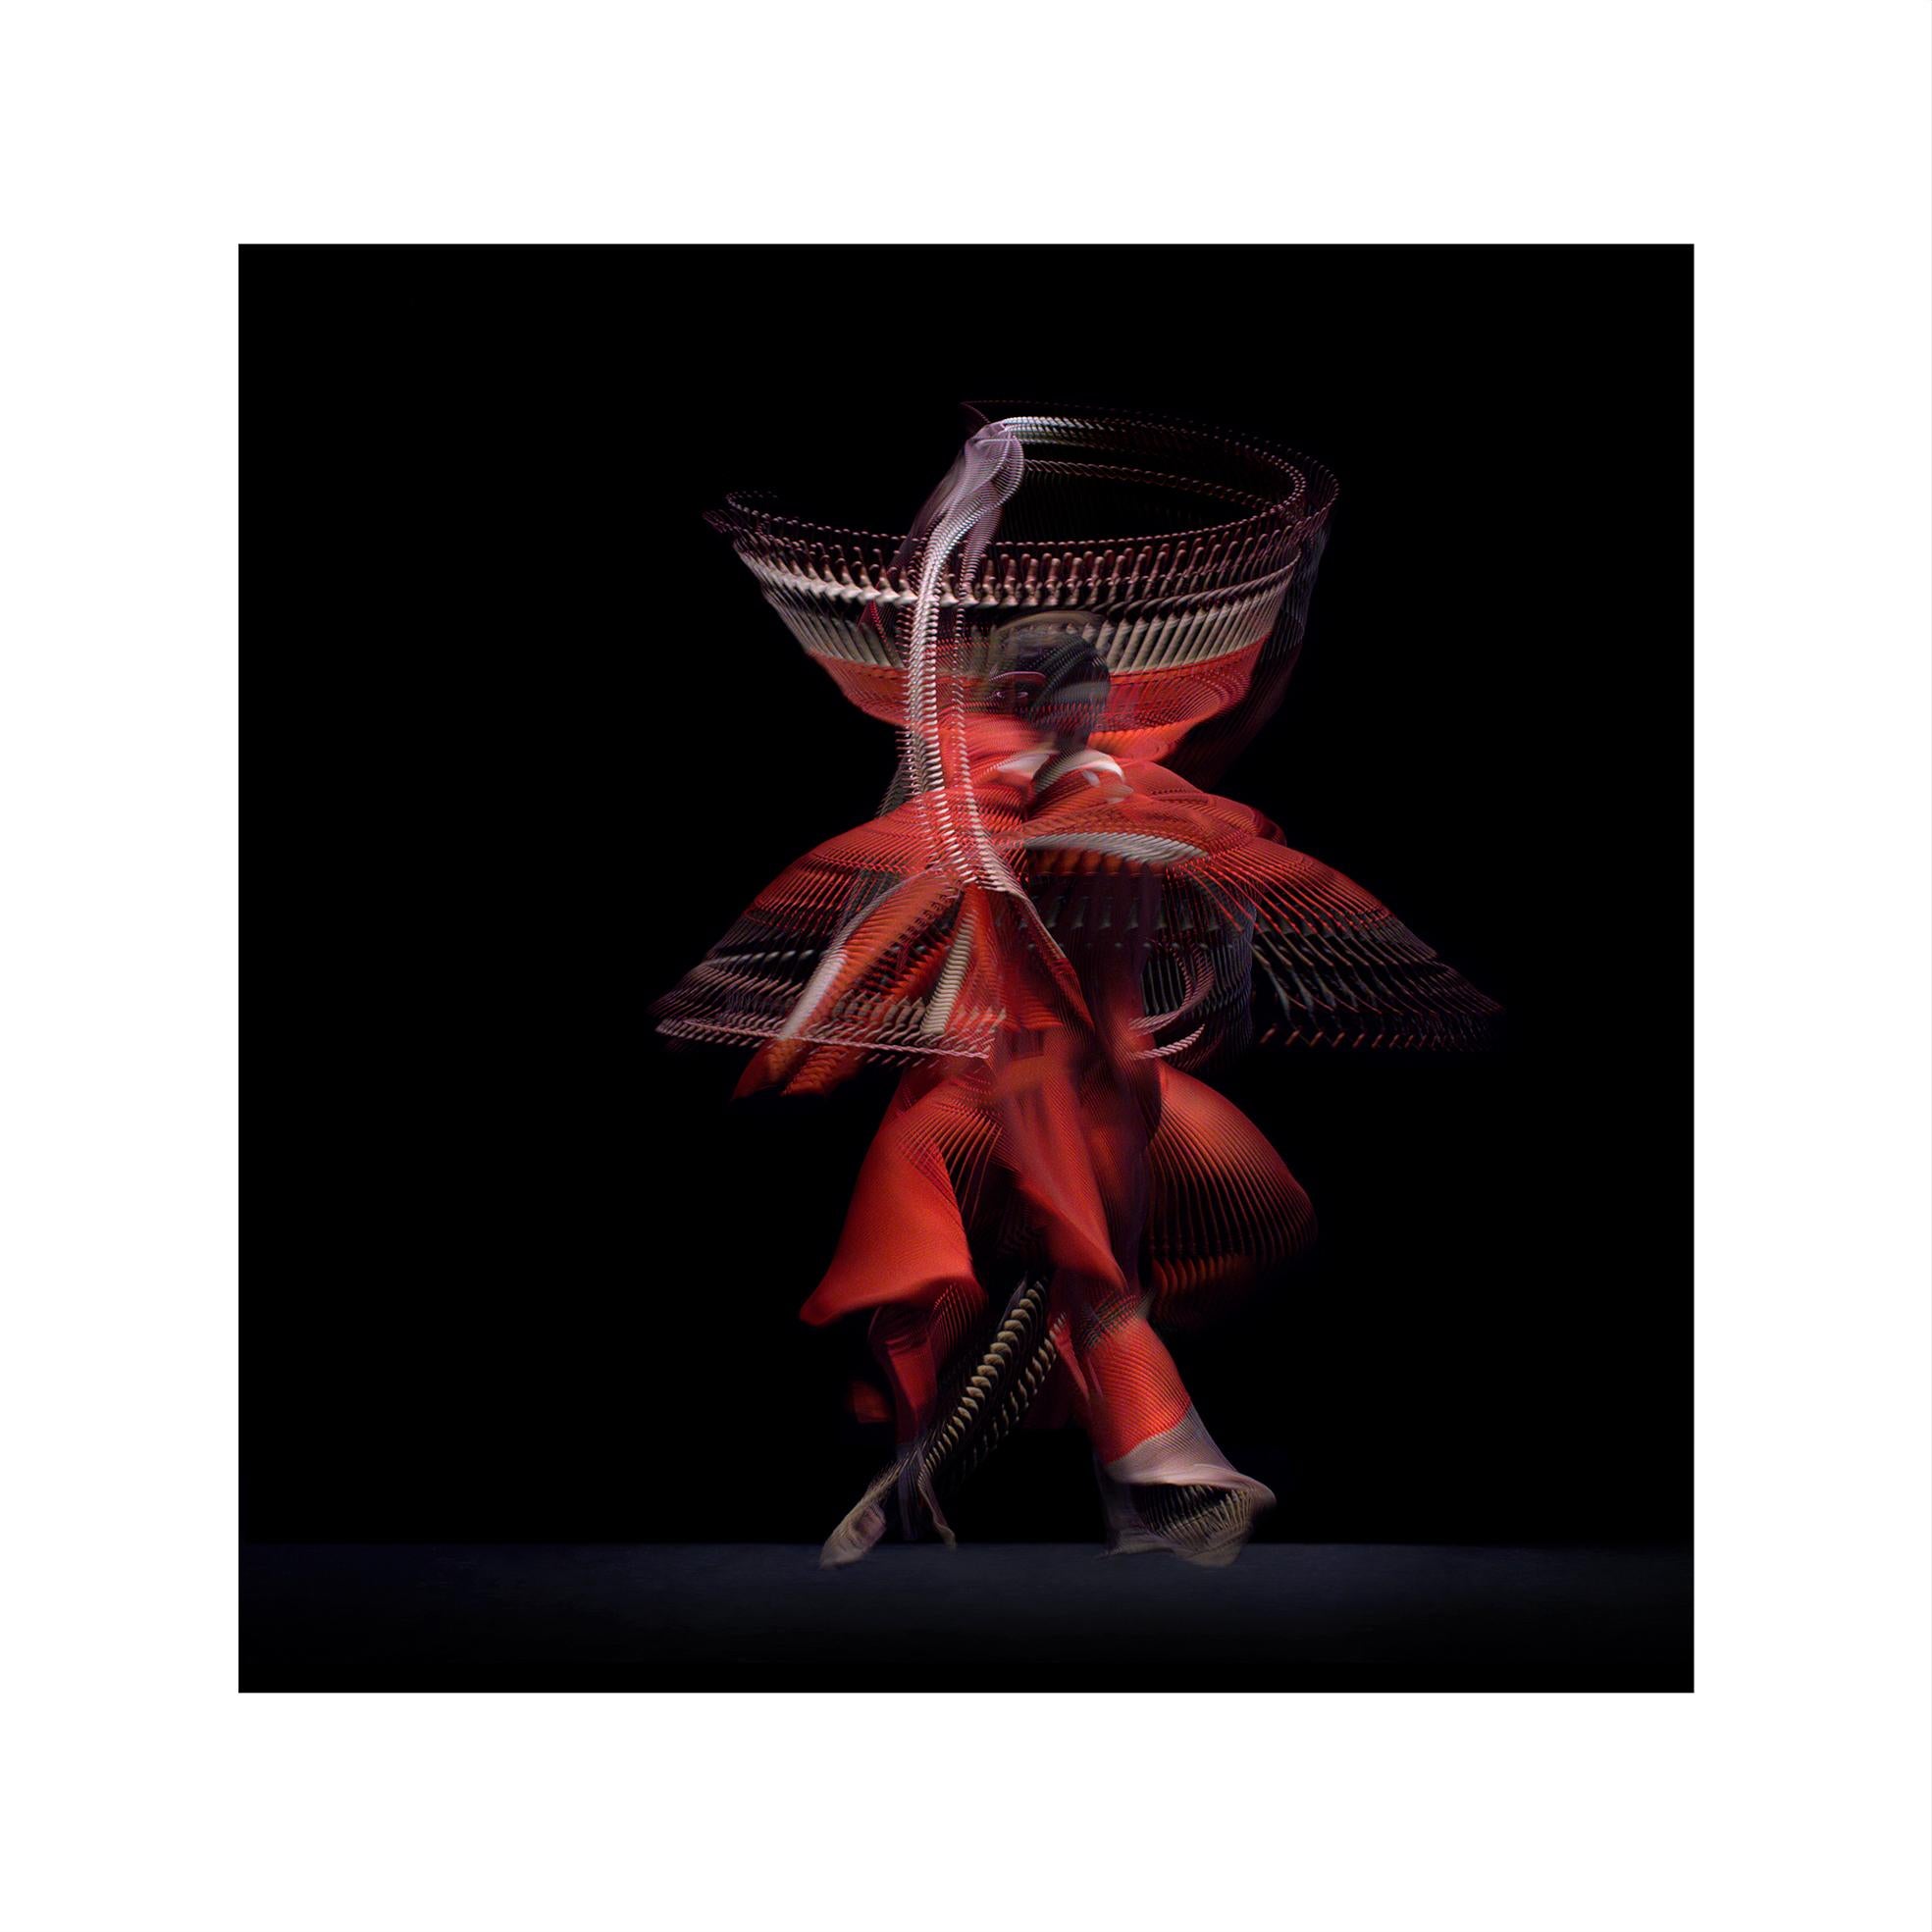 Abstract Dancers, Red 8, 2019 - Contemporary Photography, Ballet, Geometry